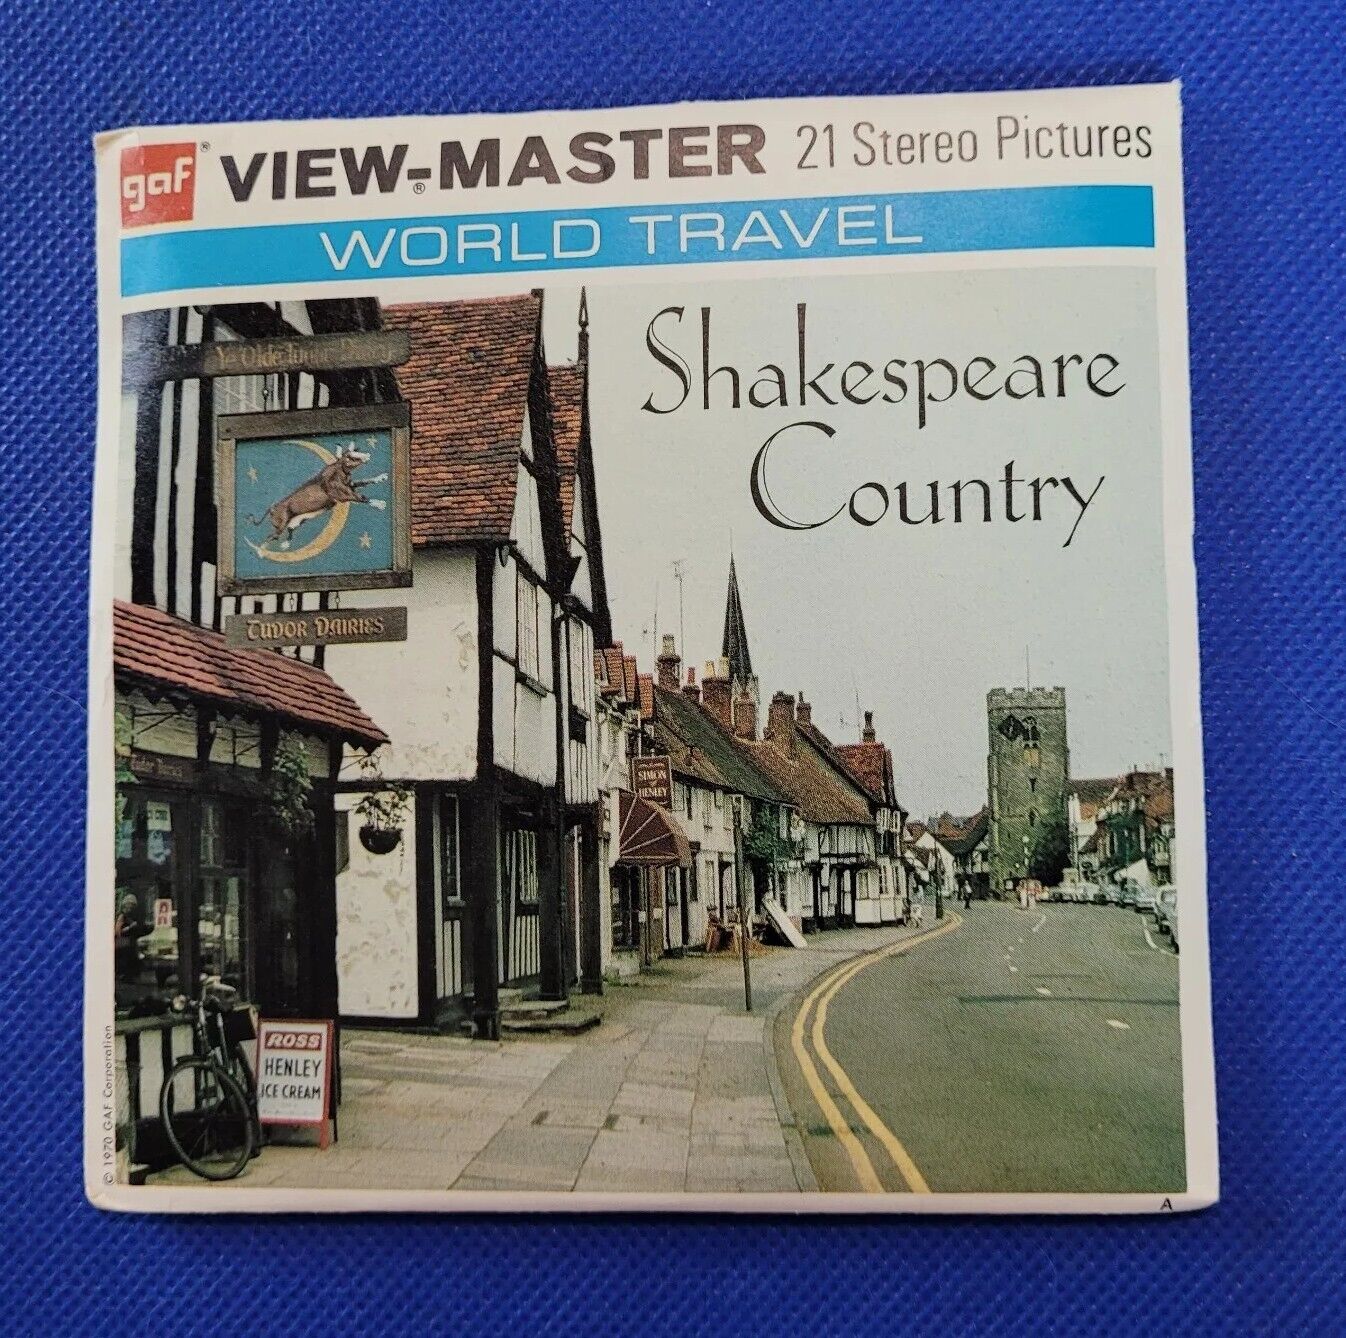 Gaf B159 Shakespeare Country Warwickshire England view-master 3 Reels Packet